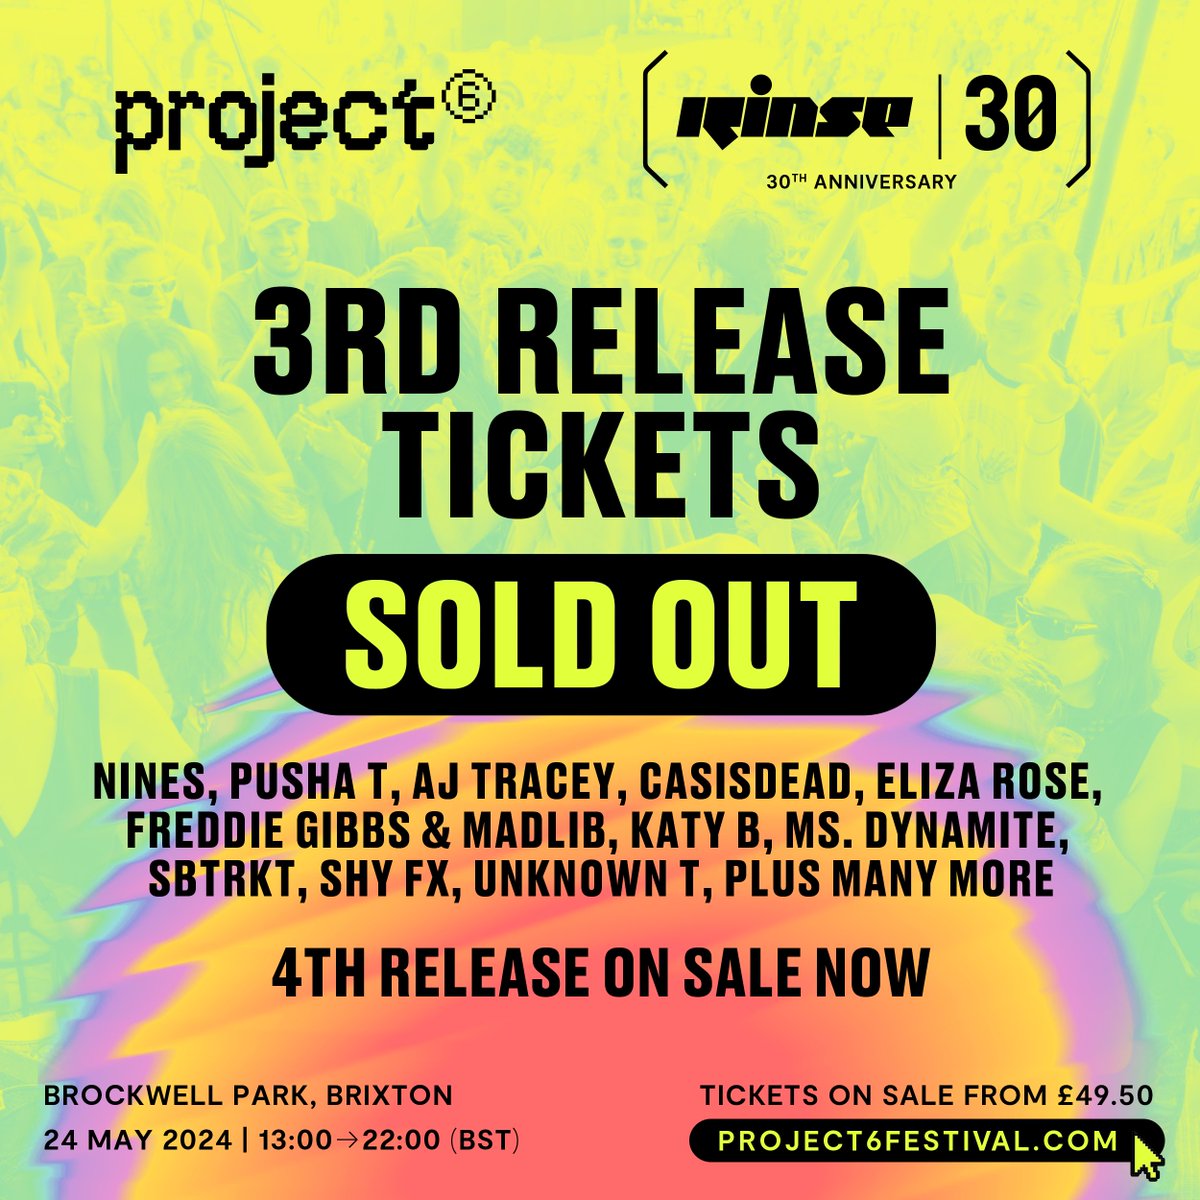 YESTERDAY'S PRICE IS NOT TODAY'S PRICE‼️ Don't say we didn't warn you! Tier 3 tickets are now sold out; left in the dust 🏜️ Tier 4 tickets are now available from £49.50 so get 'em whilst they're hot 🎫🔥 project6festival.com